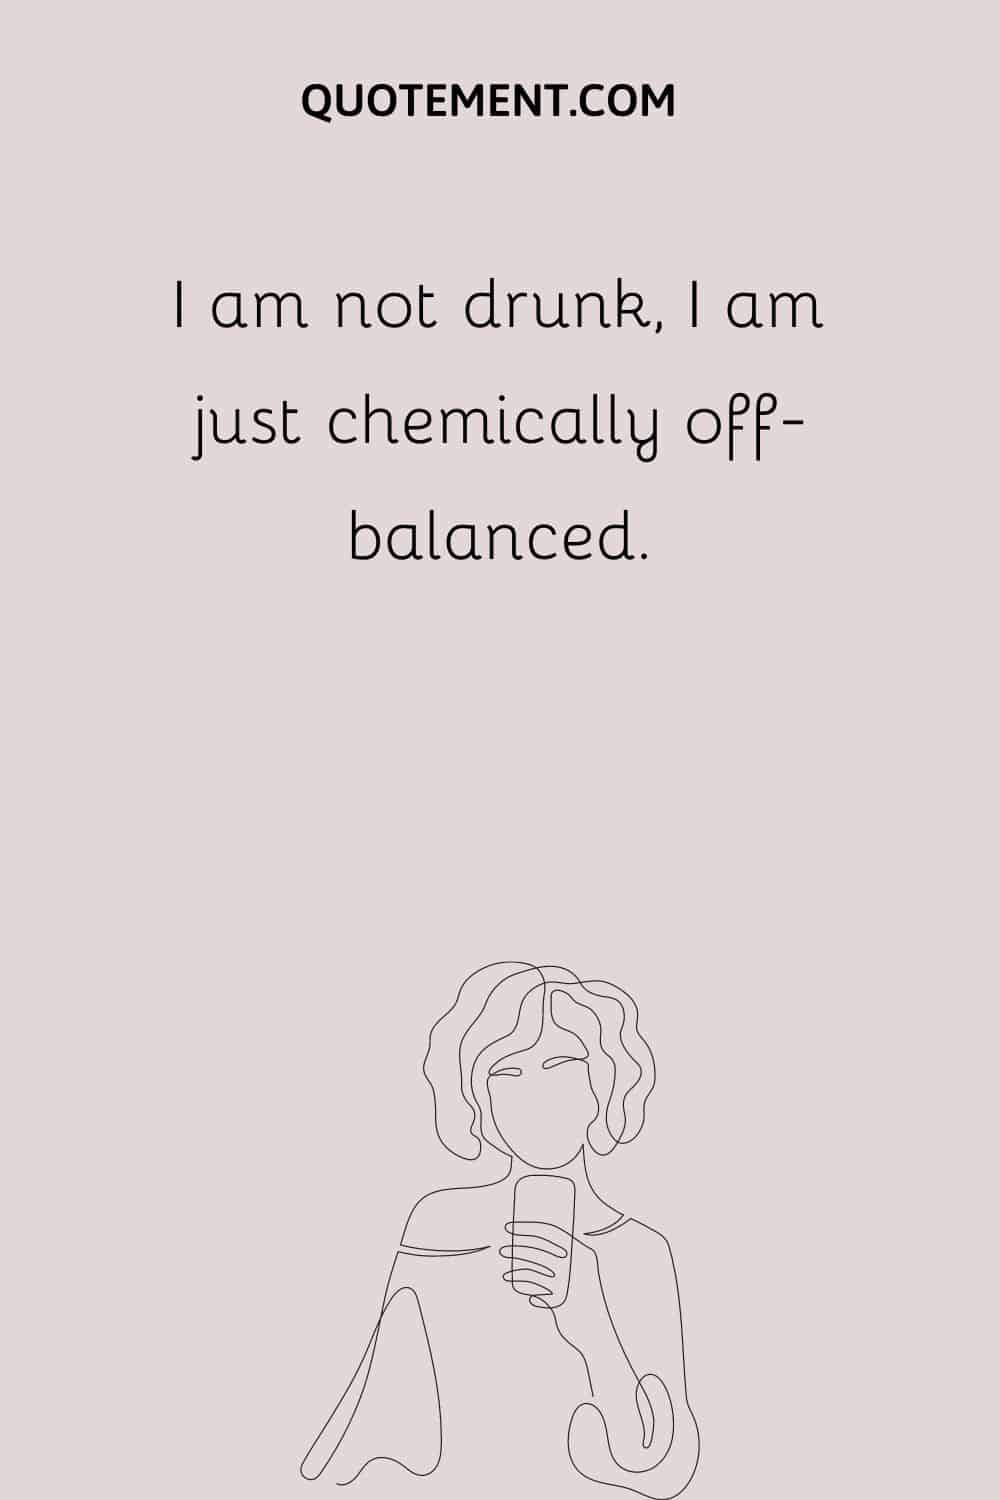 I am not drunk, I am just chemically off-balanced.